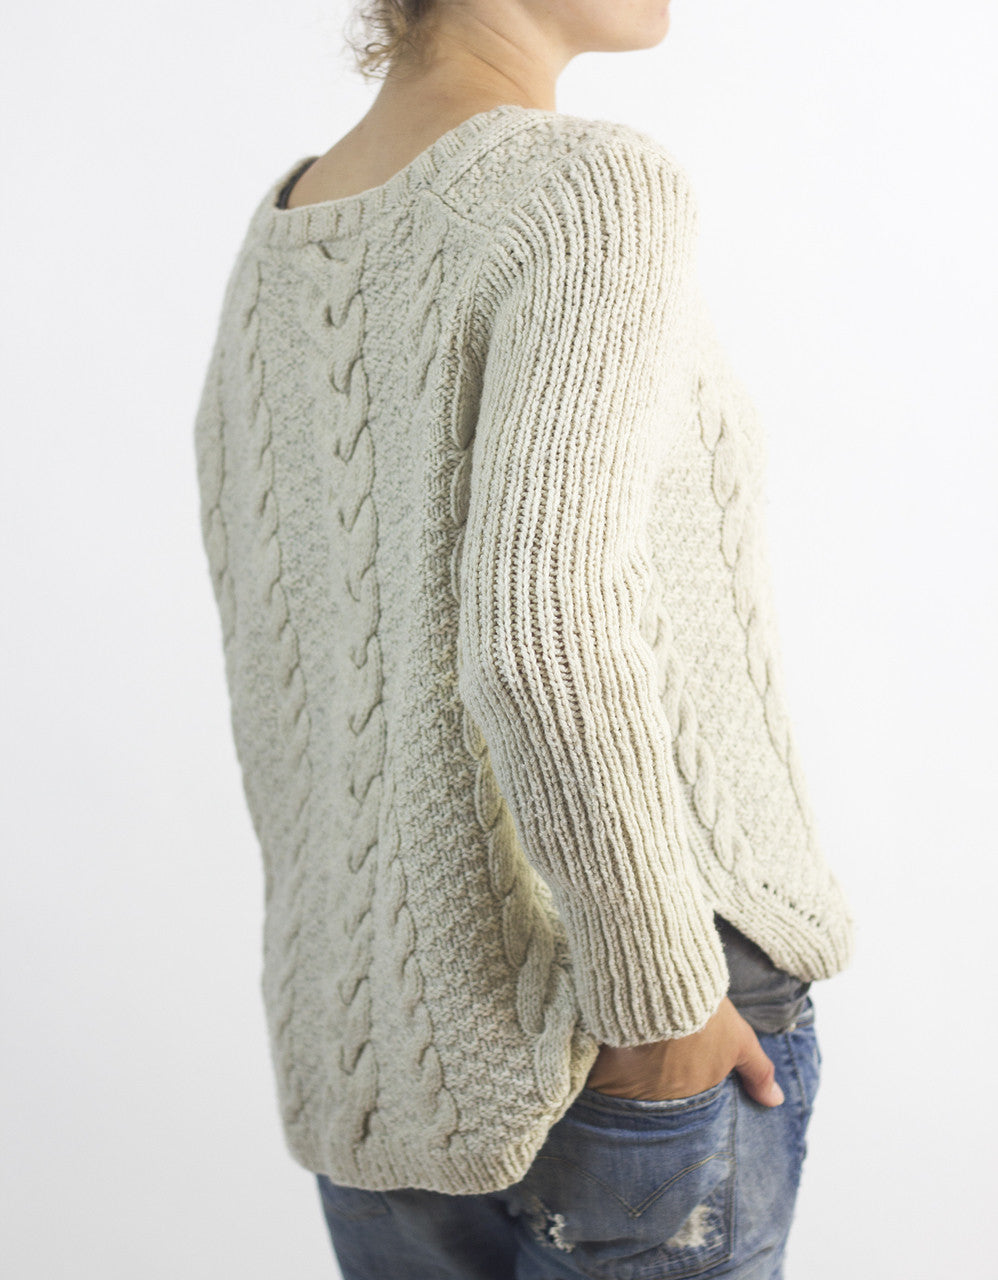 Nieve by Cocoknits